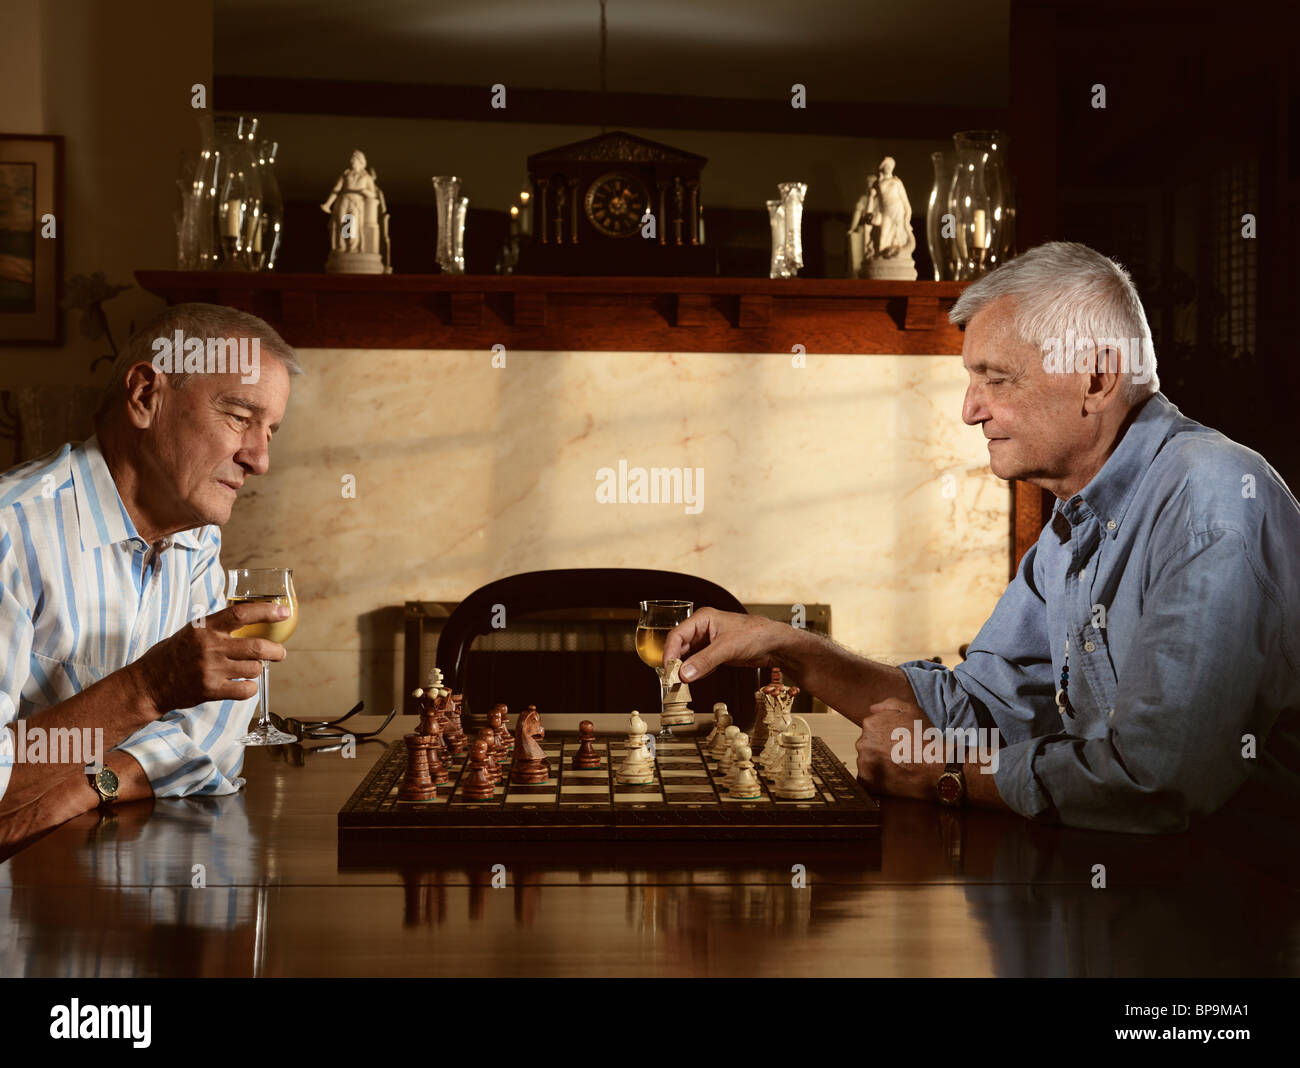 Two seniors enjoying a game of chess in the evening Stock Photo